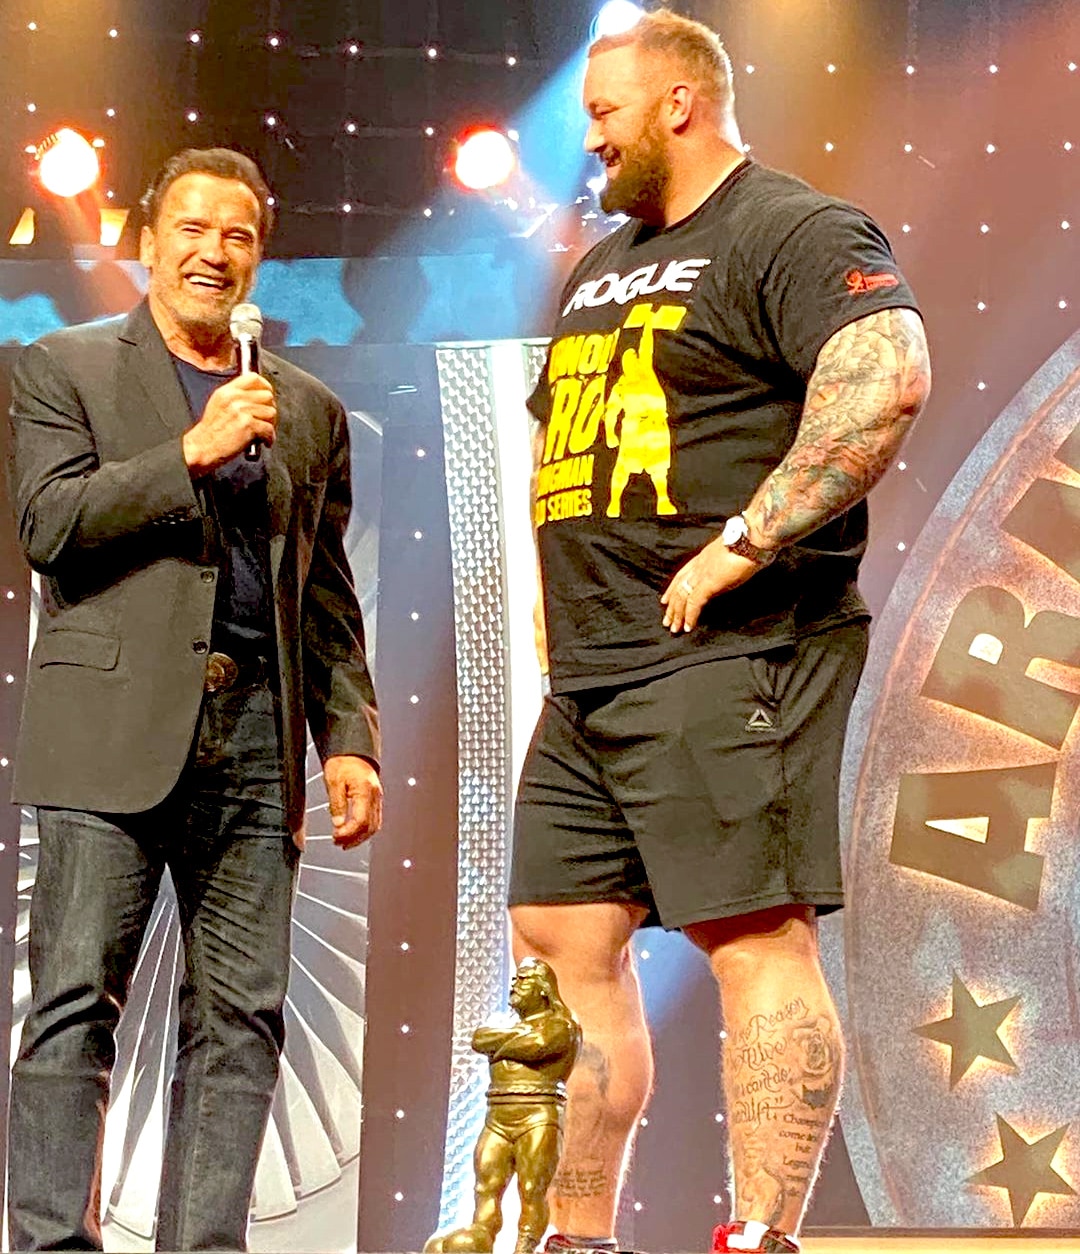 Arnold Strongman Classic 2020 Results And Prize Money Fitness Volt